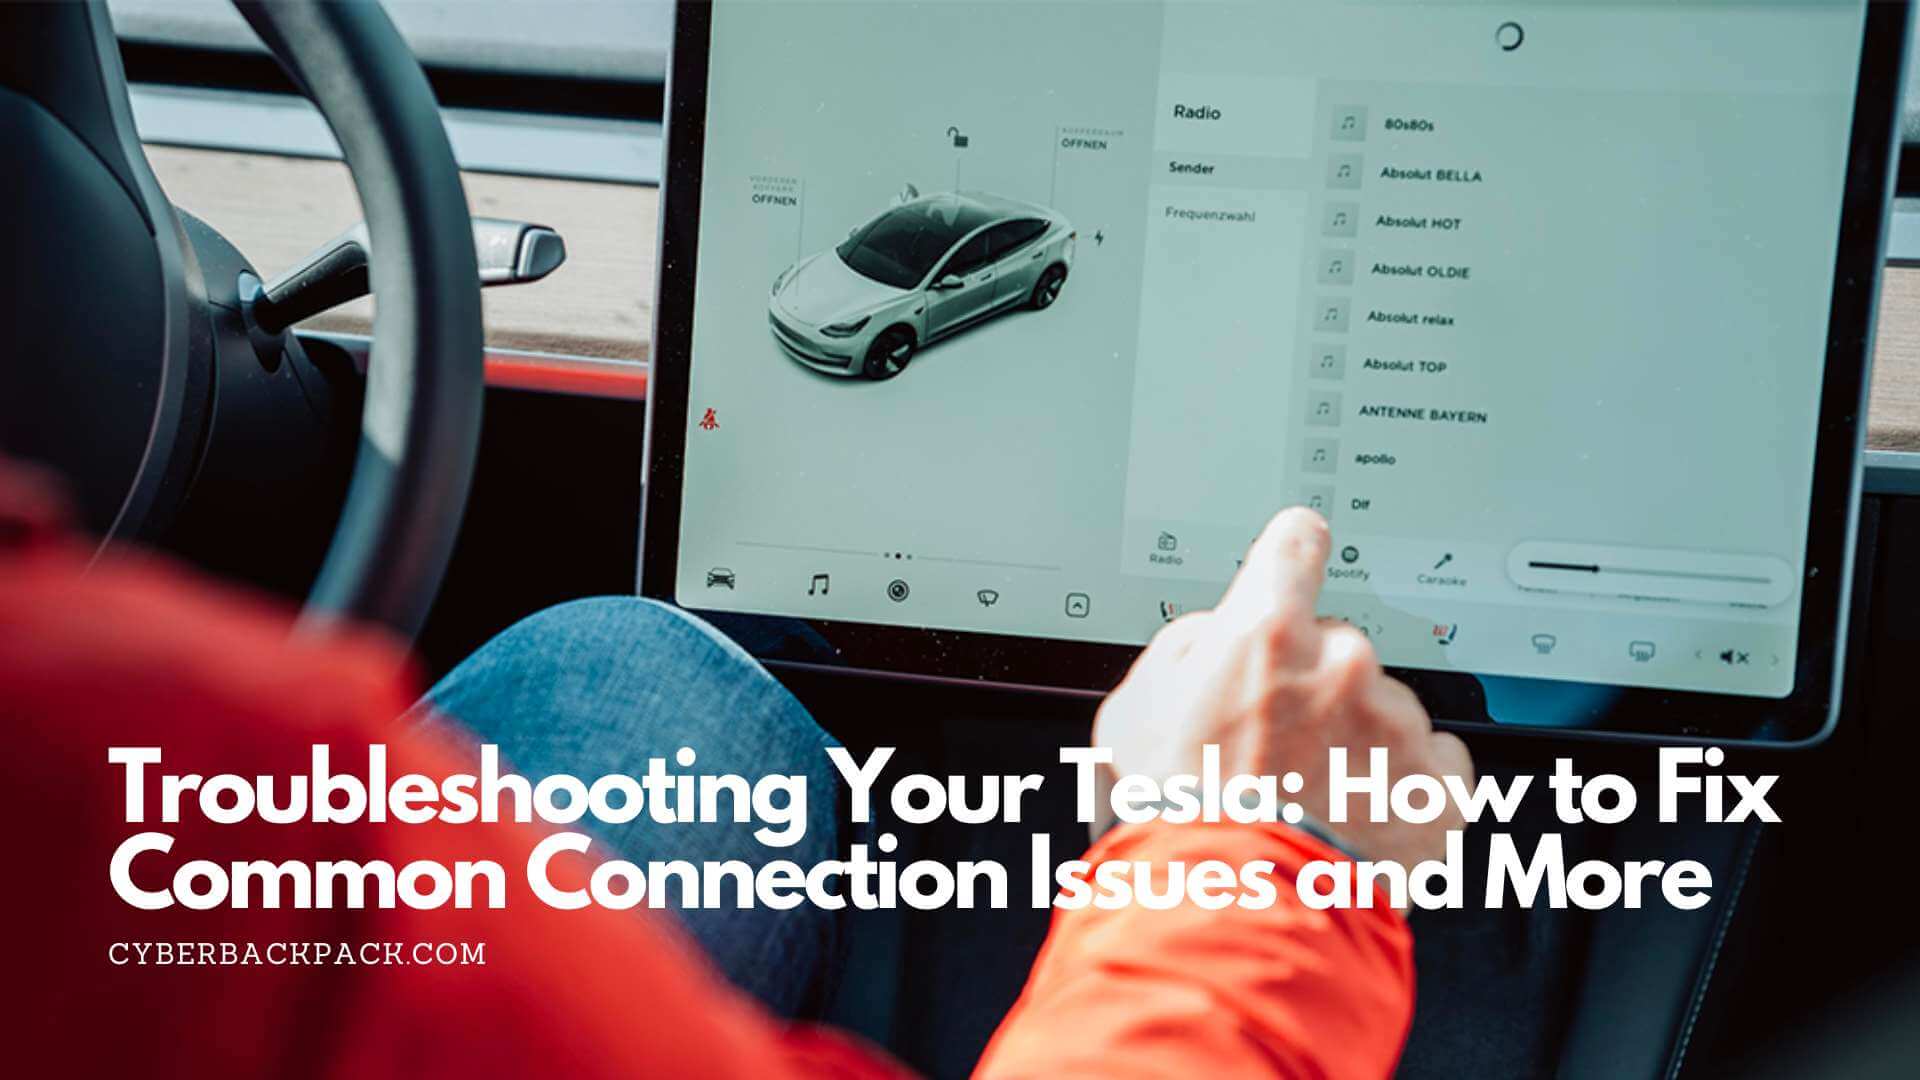 Troubleshooting Your Tesla: How to Fix Common Connection Issues and More